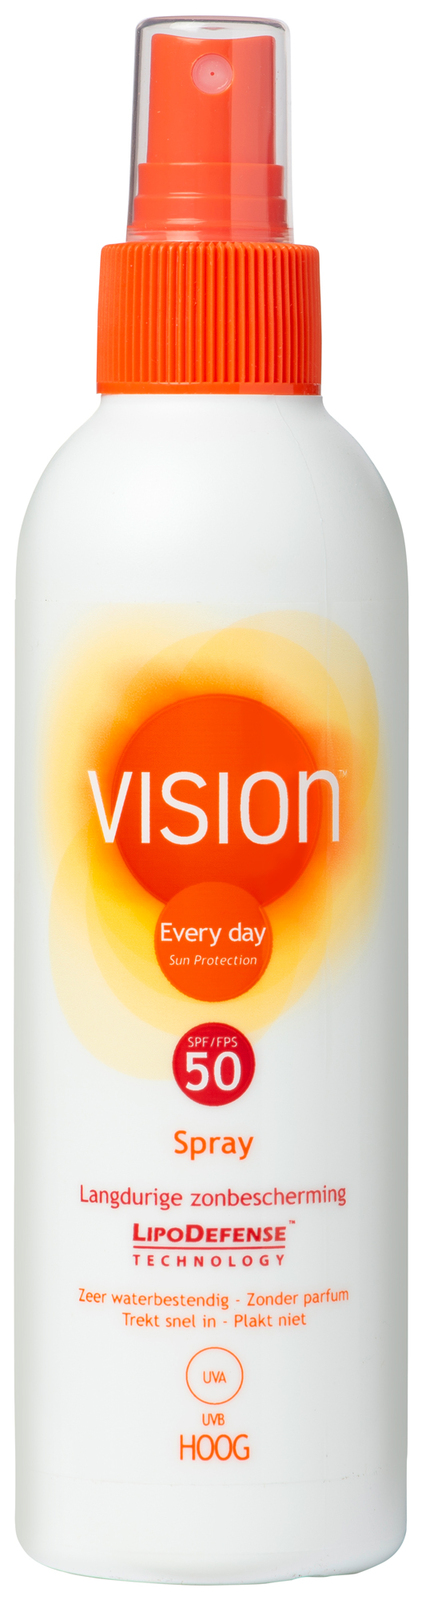 Image of Vision Every Day Sun Spray SPF50 